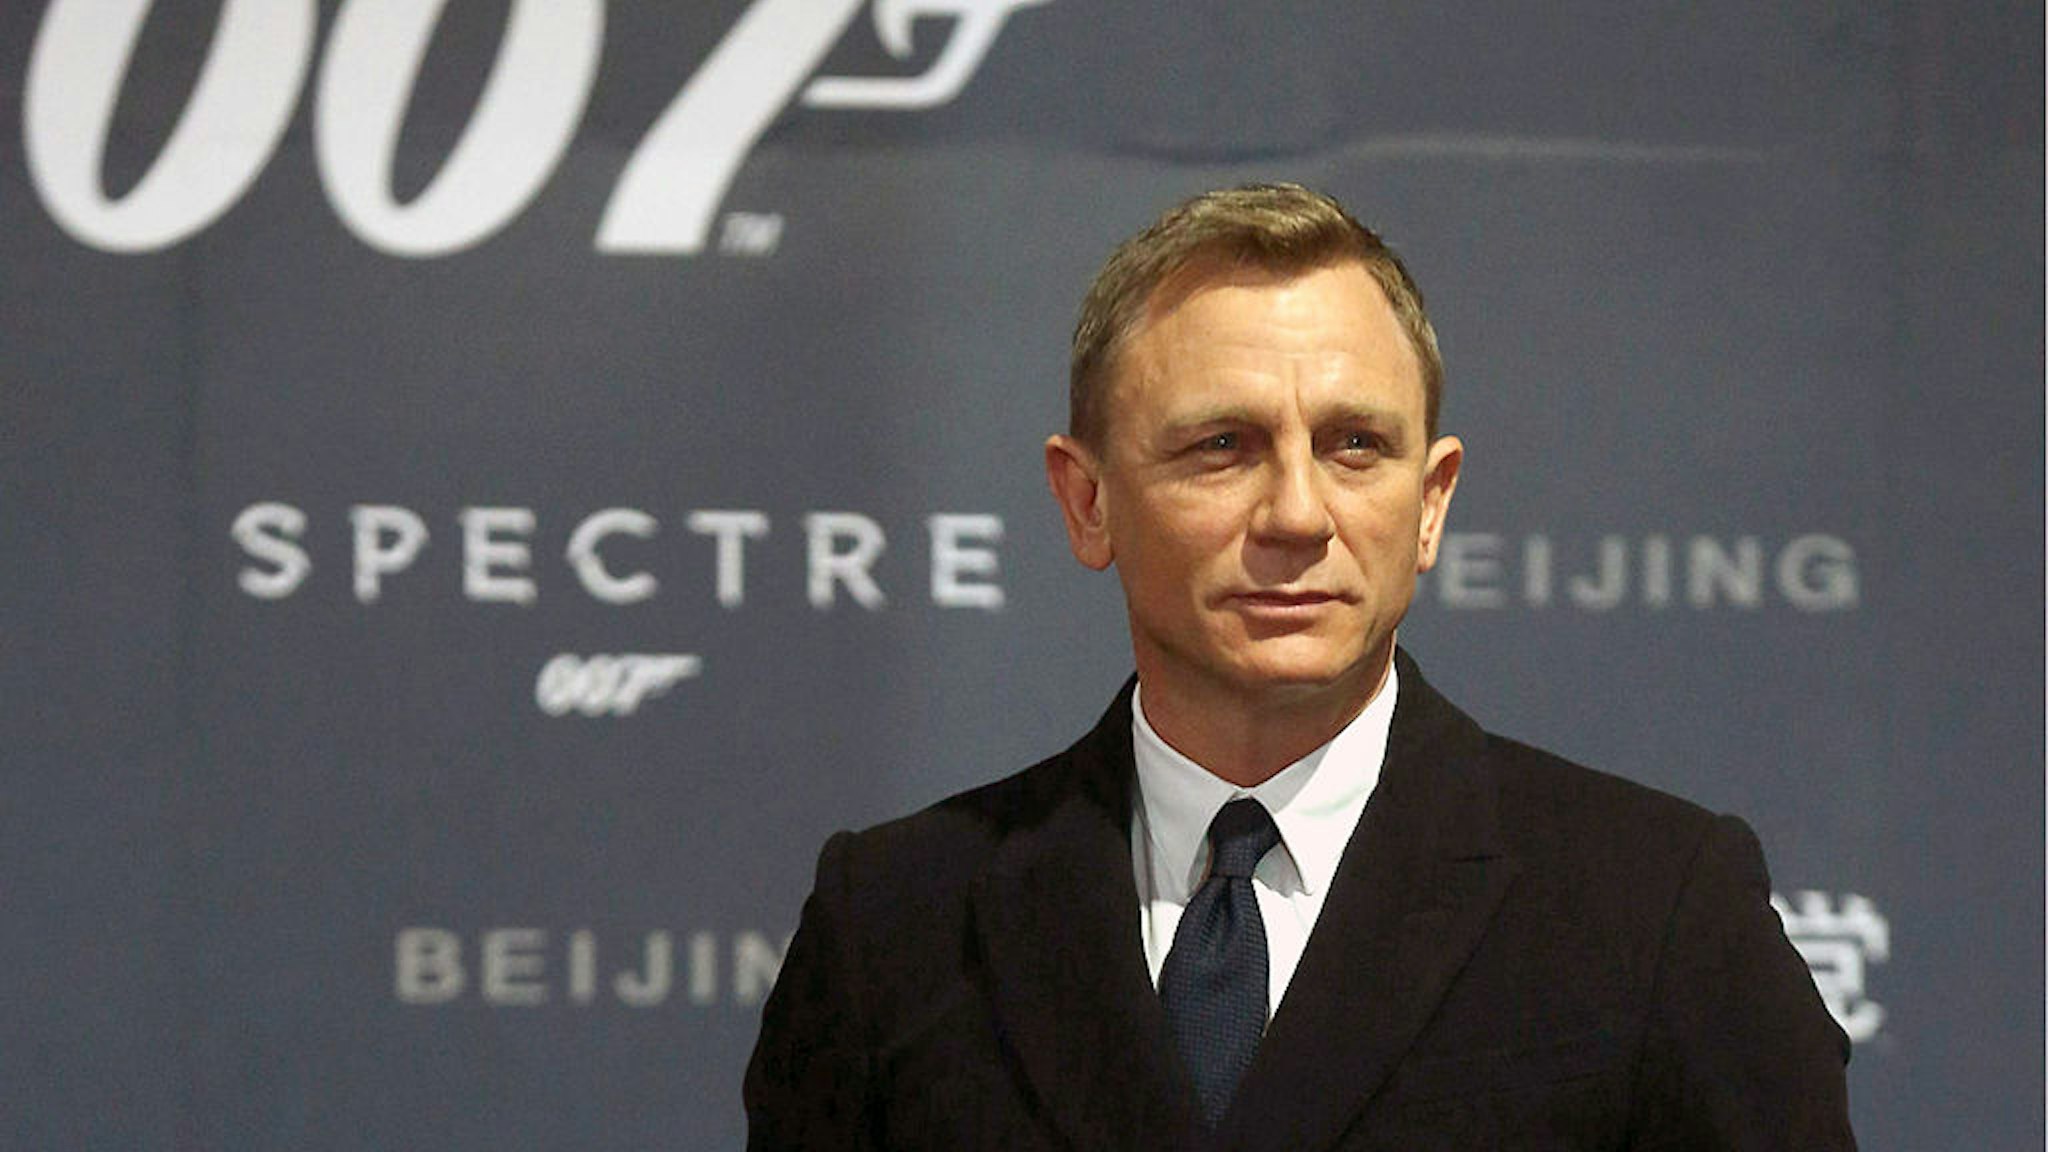 BEIJING, CHINA - NOVEMBER 12: (CHINA OUT) Actor Daniel Craig attends 'Spectre' premiere at The Place on November 12, 2015 in Beijing, China.